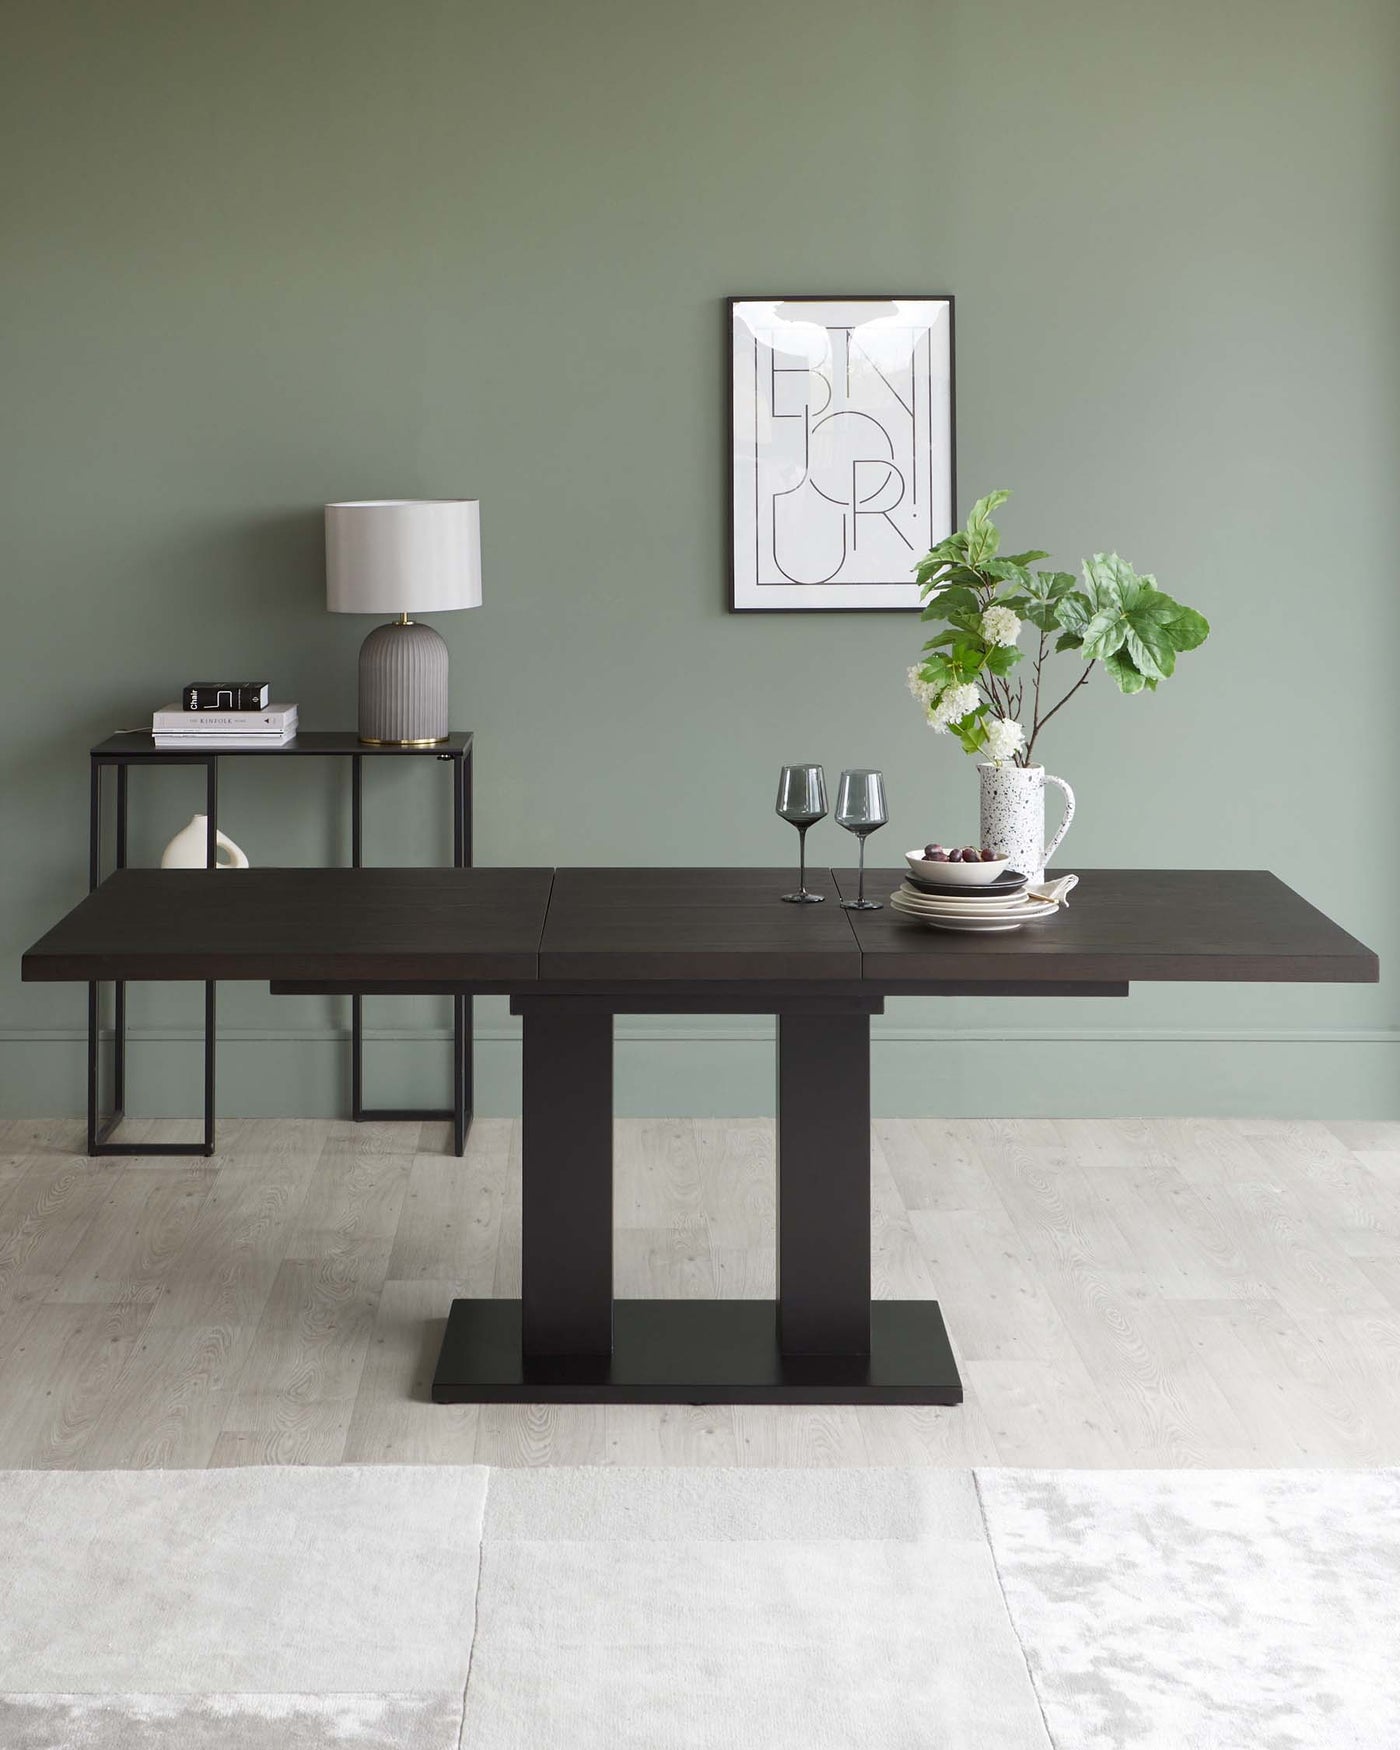 Modern minimalist furniture set in a contemporary dining room, featuring a dark wooden table with a robust rectangular top and block legs, complemented by a matching slender console table with metal frame legs. Both pieces showcase clean lines and a sleek silhouette.